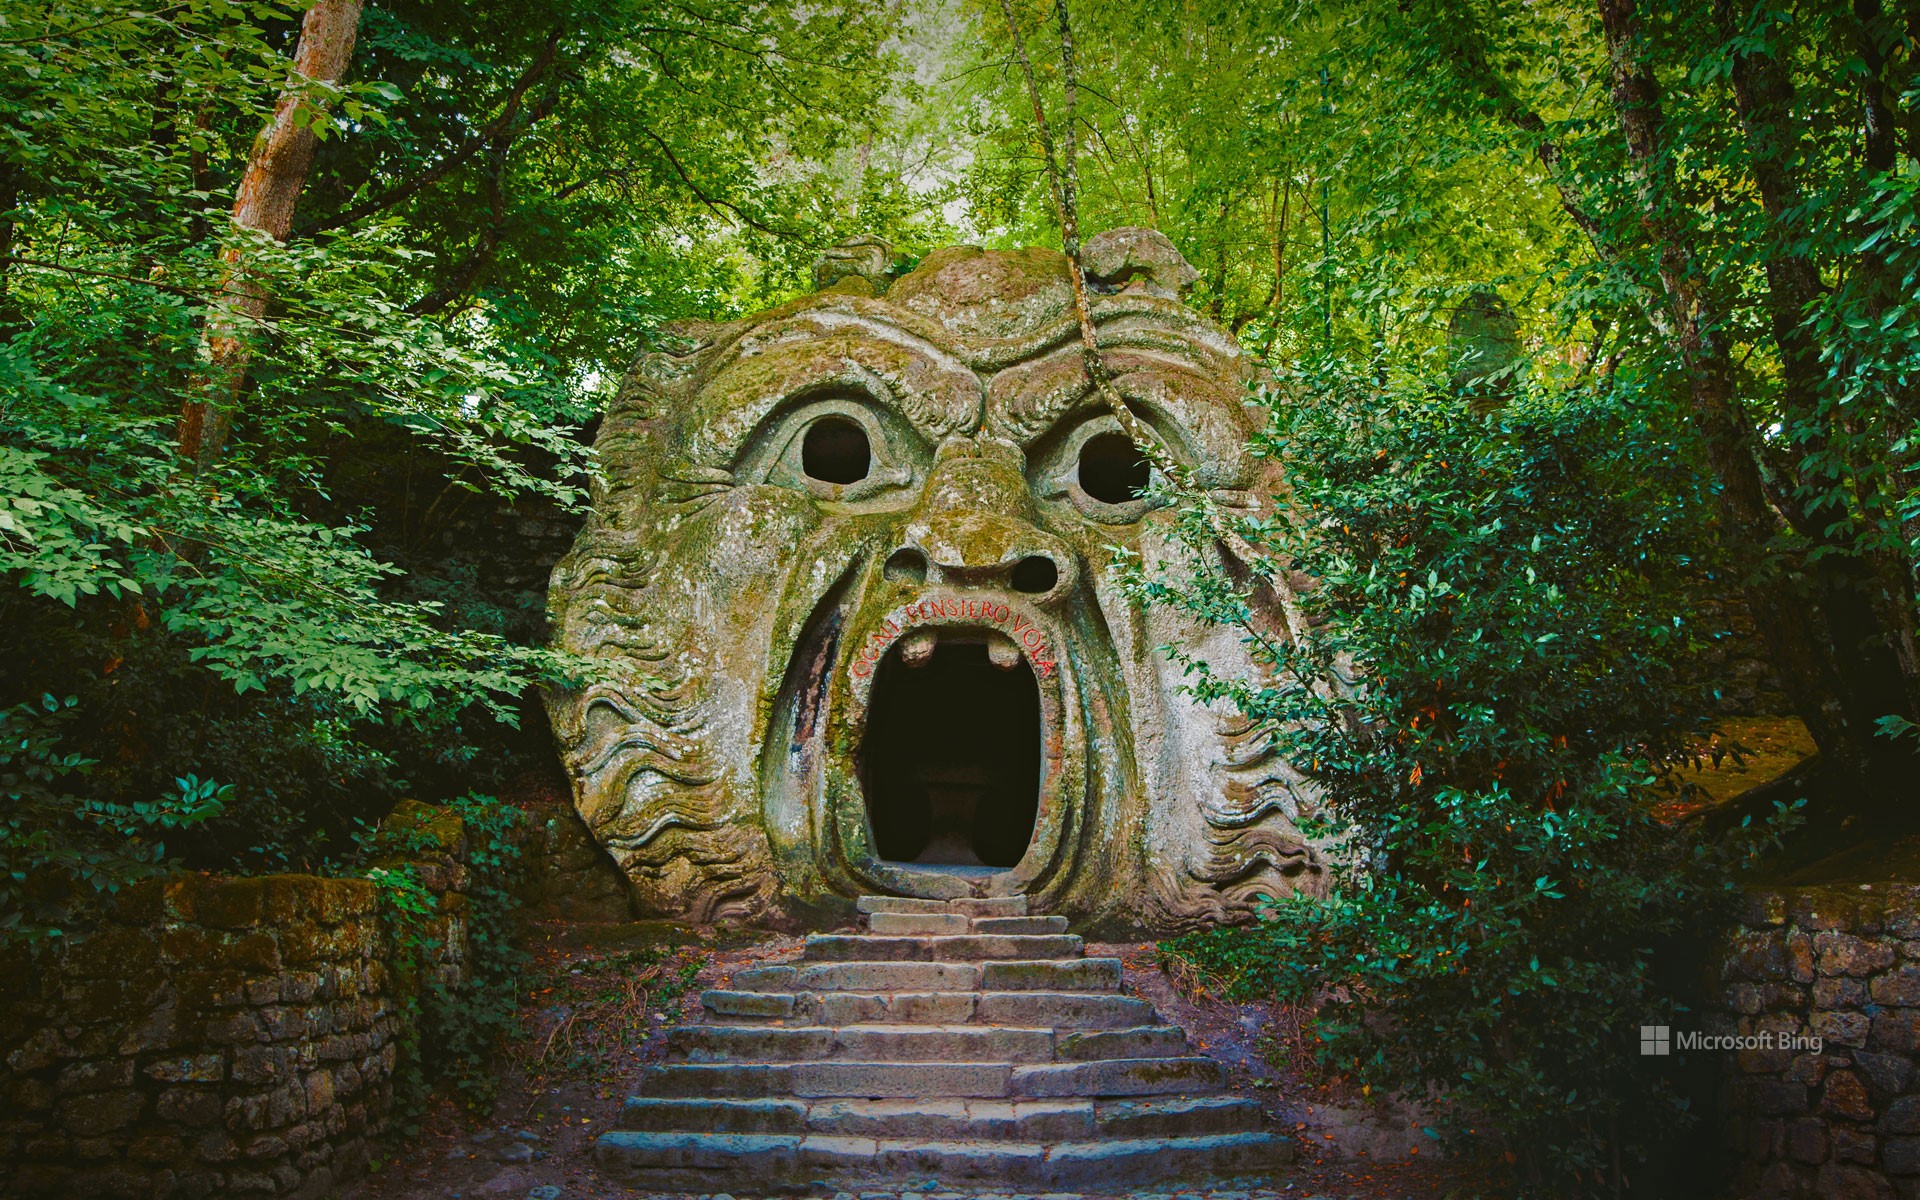 Orcus sculpture in the Gardens of Bomarzo in Bomarzo, Italy